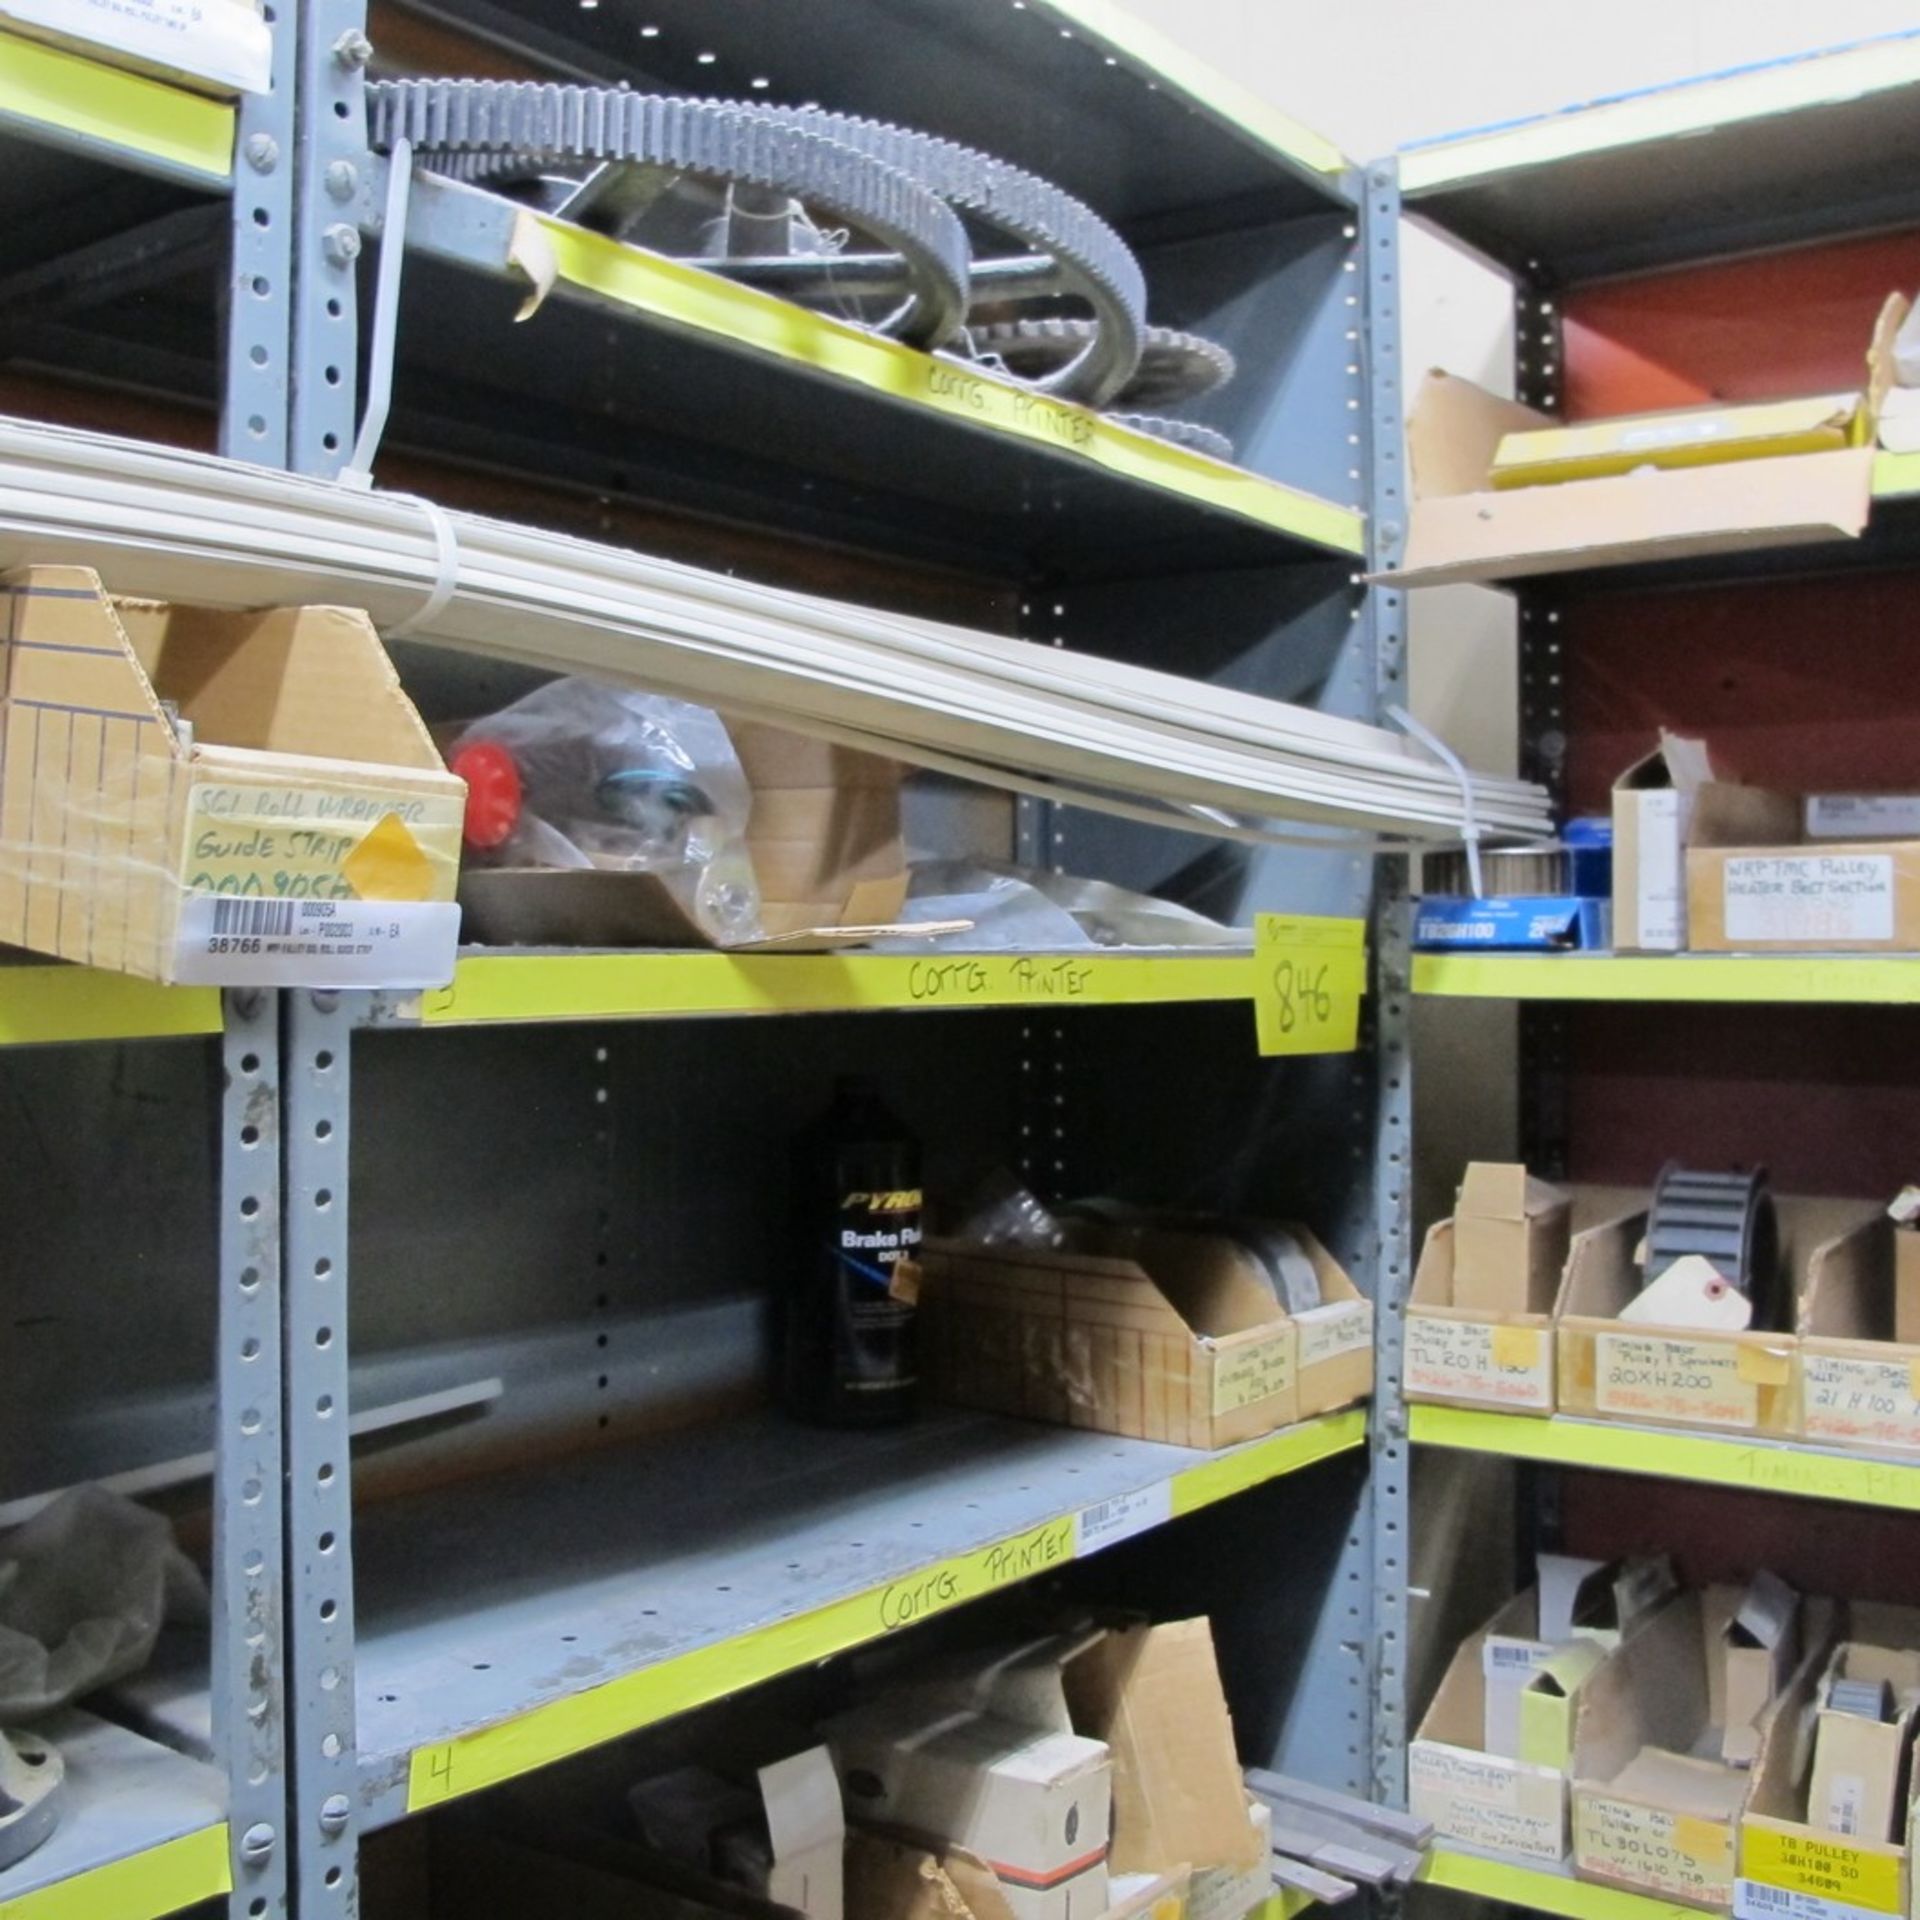 LOT OF ASST. PULLIES, TIMING BELTS, PRINTER PARTS, CLEANER, WRAPPER PARTS W/ (4) SECTIONS OF RACKING - Image 8 of 12